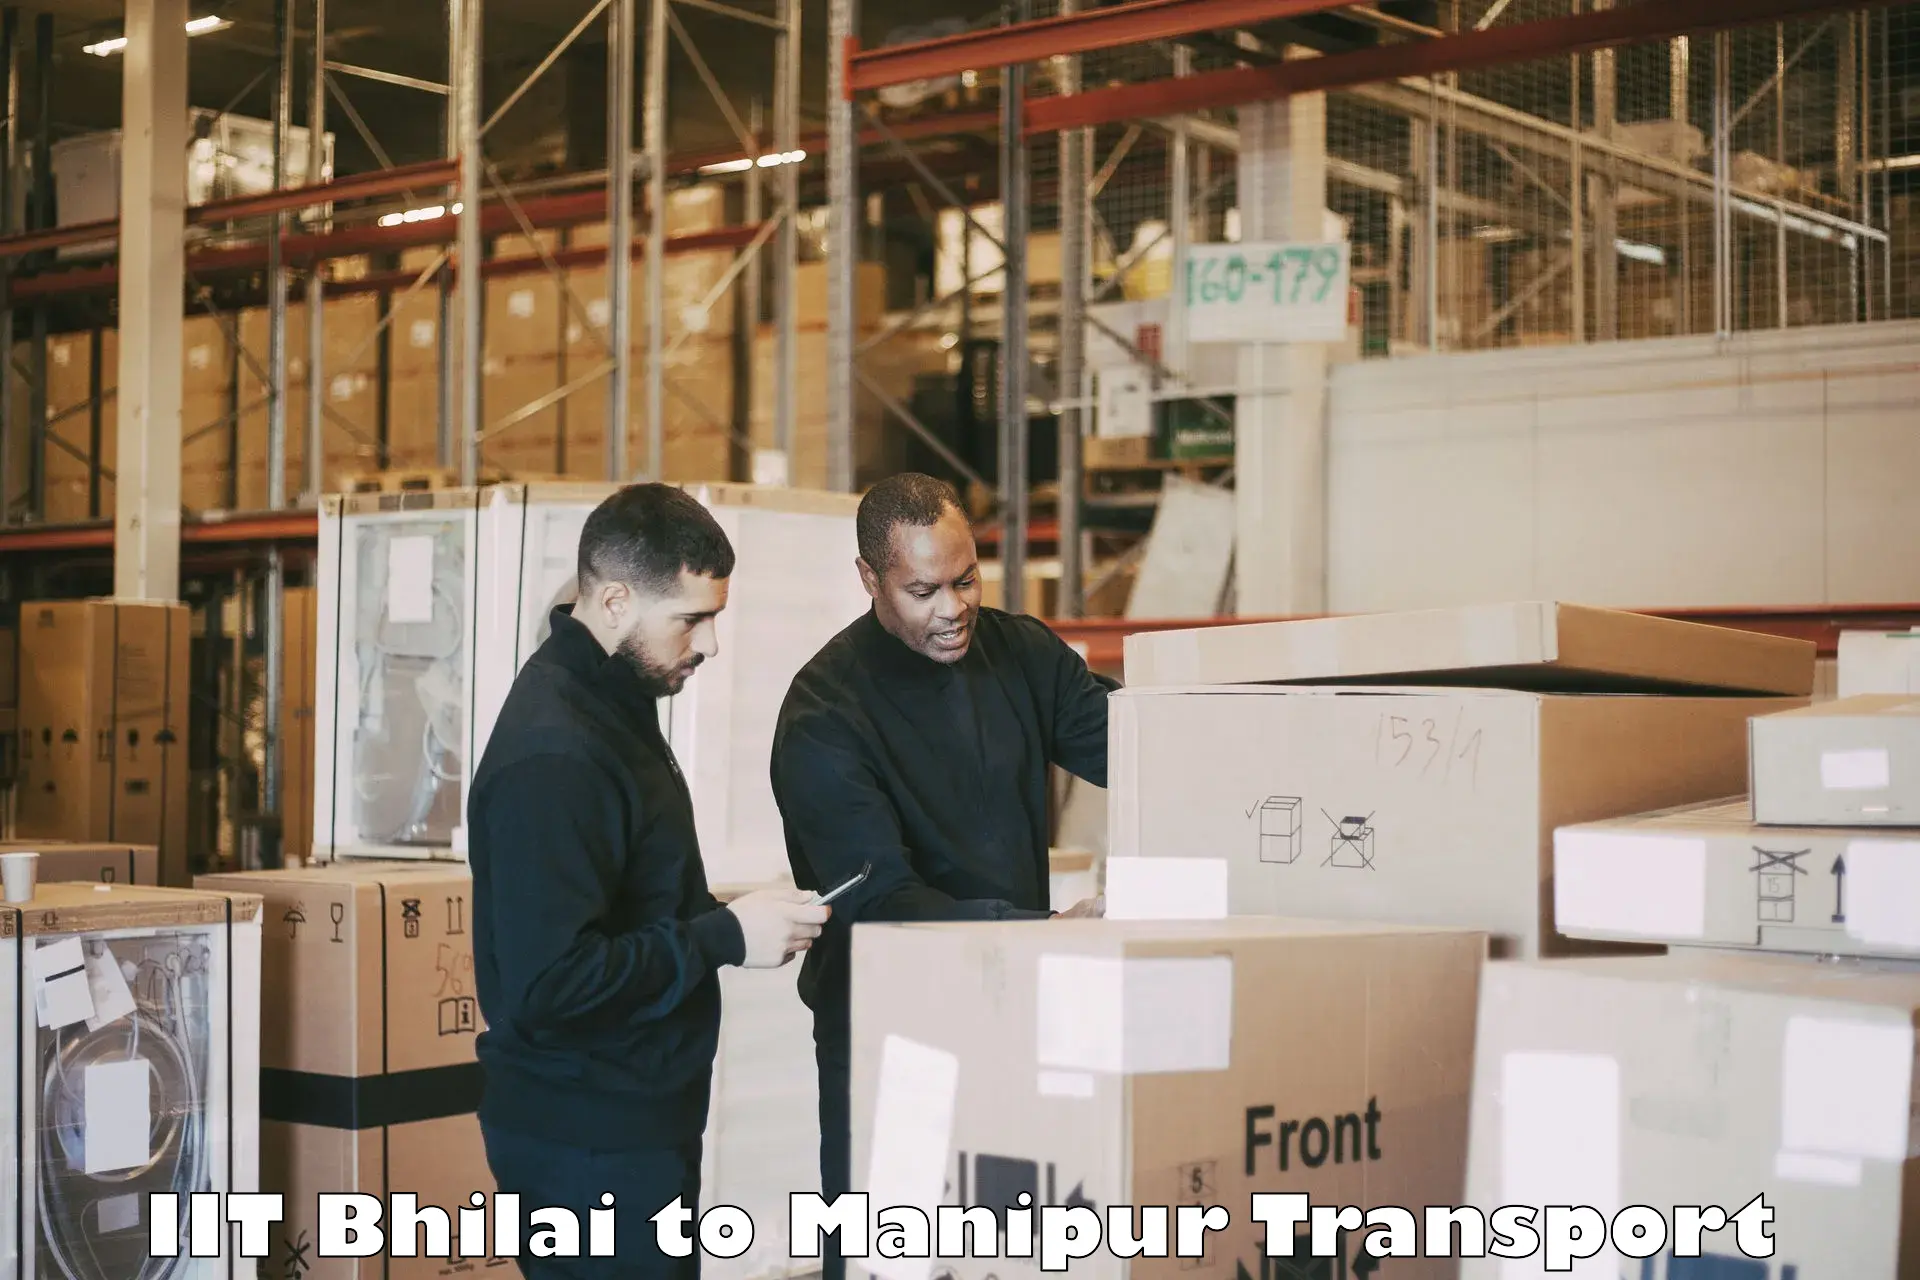 Commercial transport service IIT Bhilai to Manipur